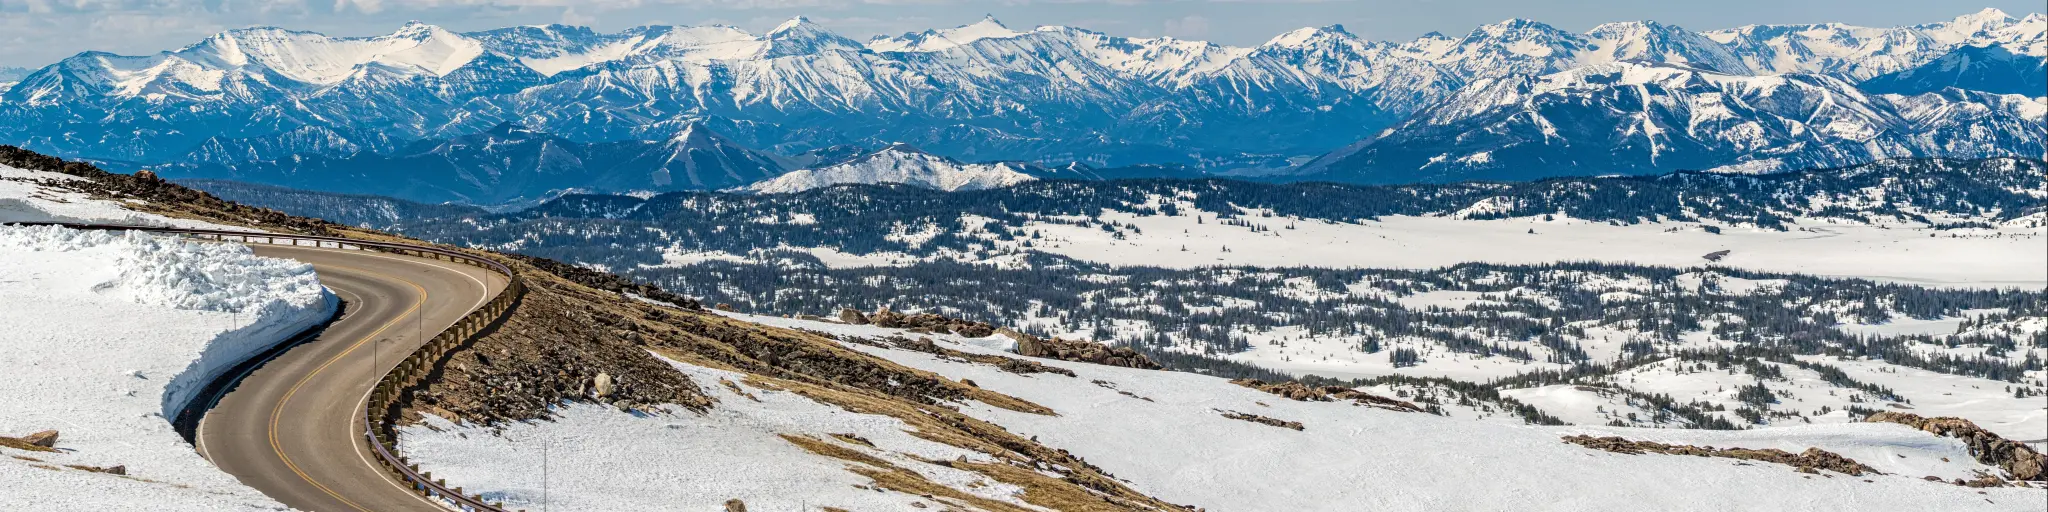 Panoramic view of snowy mountain ranges and highway along the Beartooth Scenic Highway. Montana and Wyoming, USA